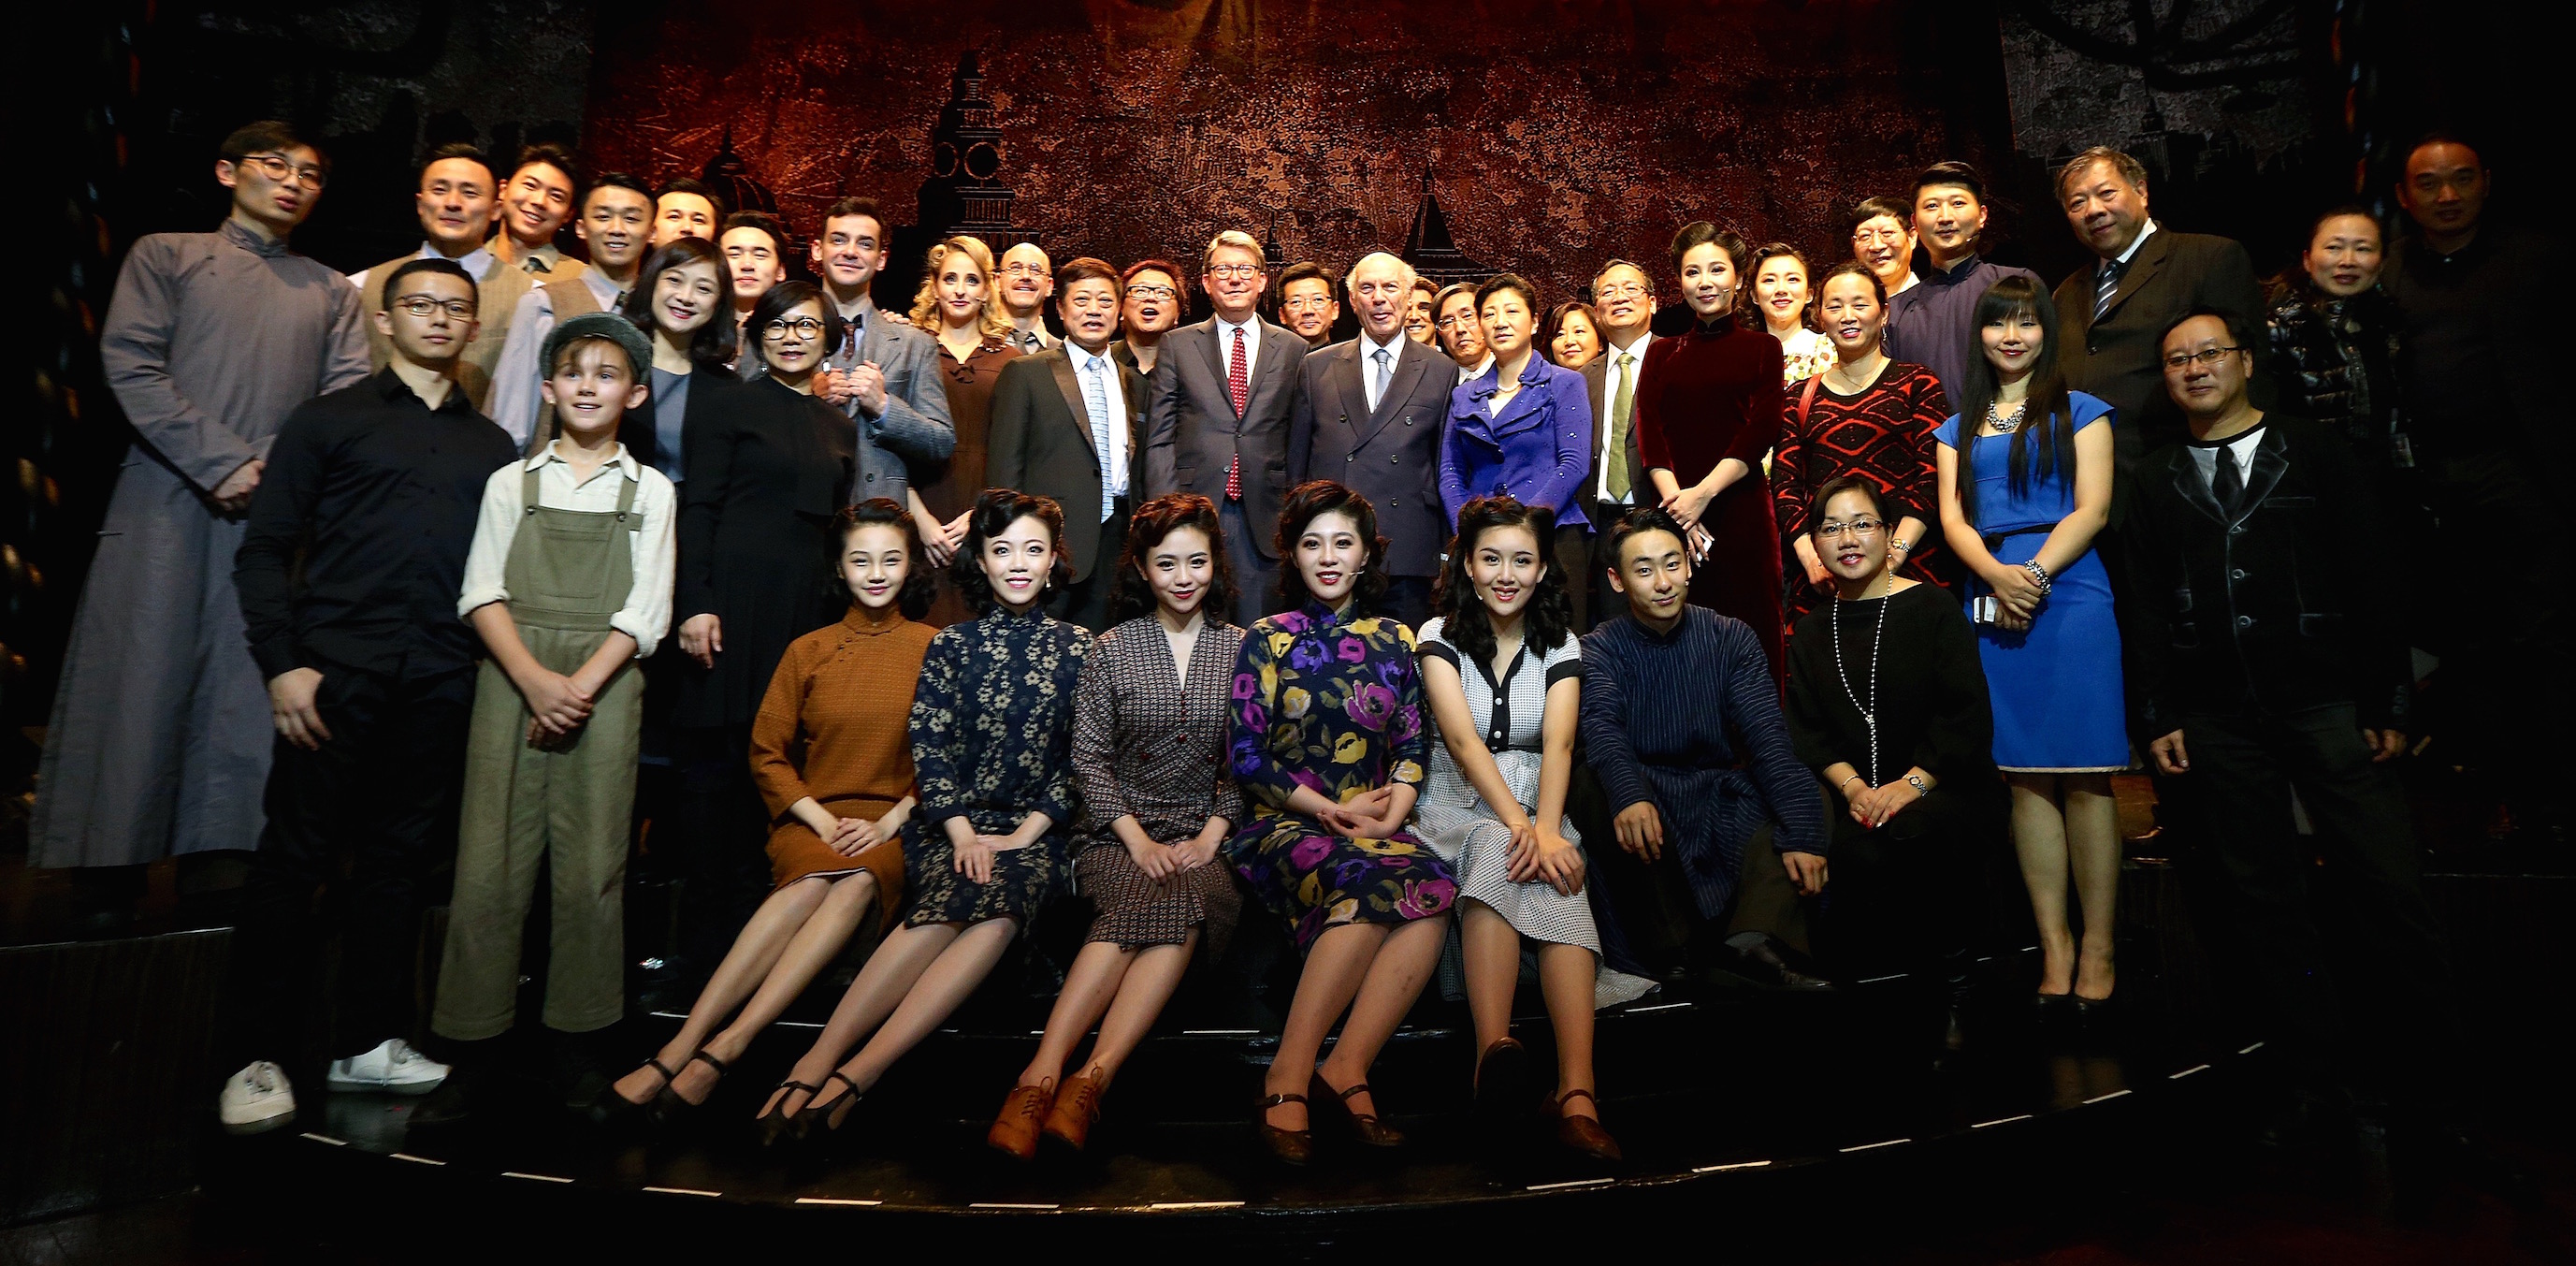 Shimmer – New Musical About WWII Jews in Shanghai